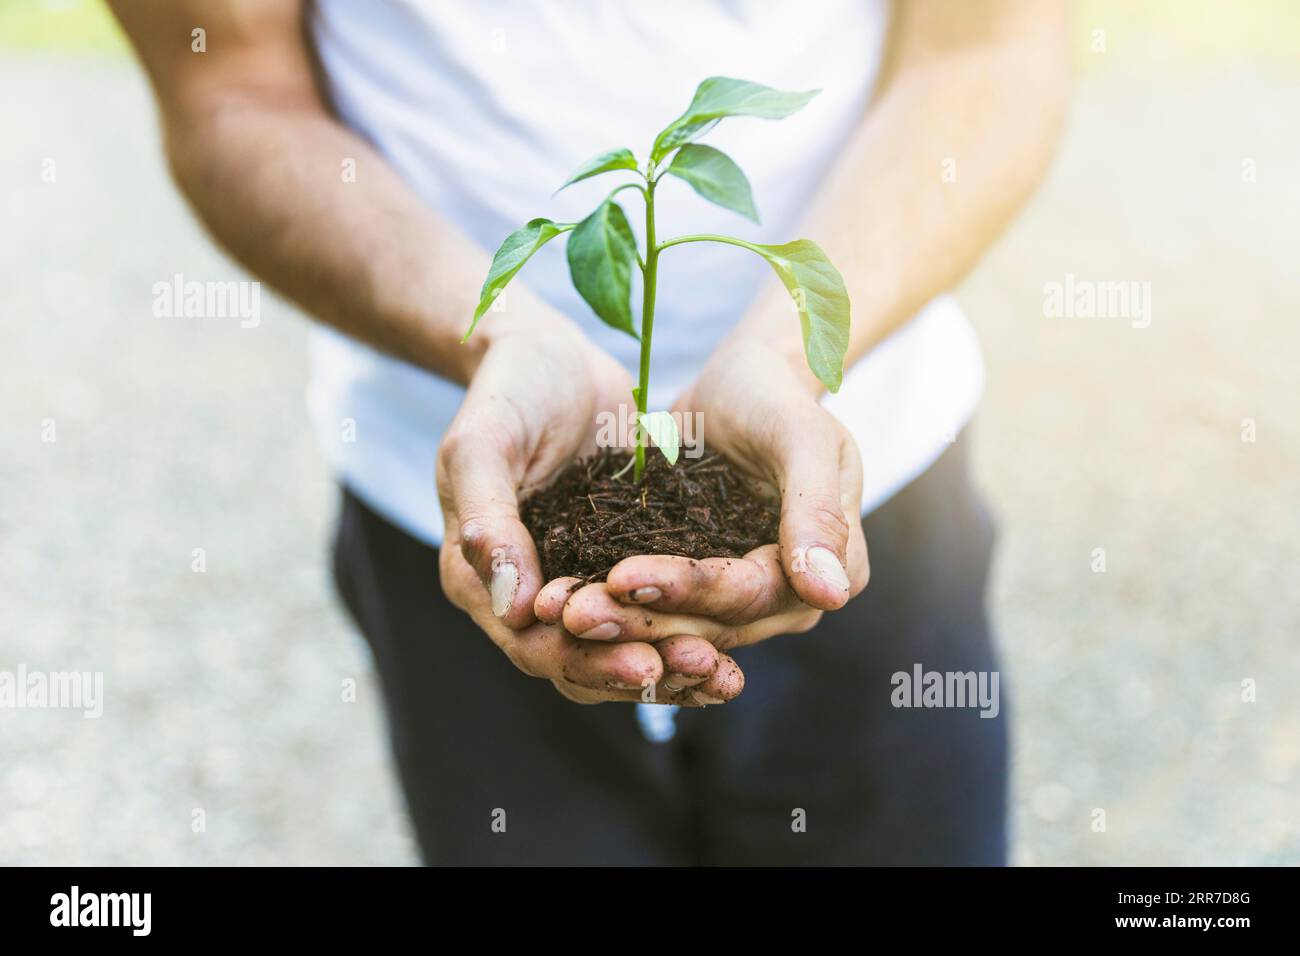 Crop person showing seedling Stock Photo